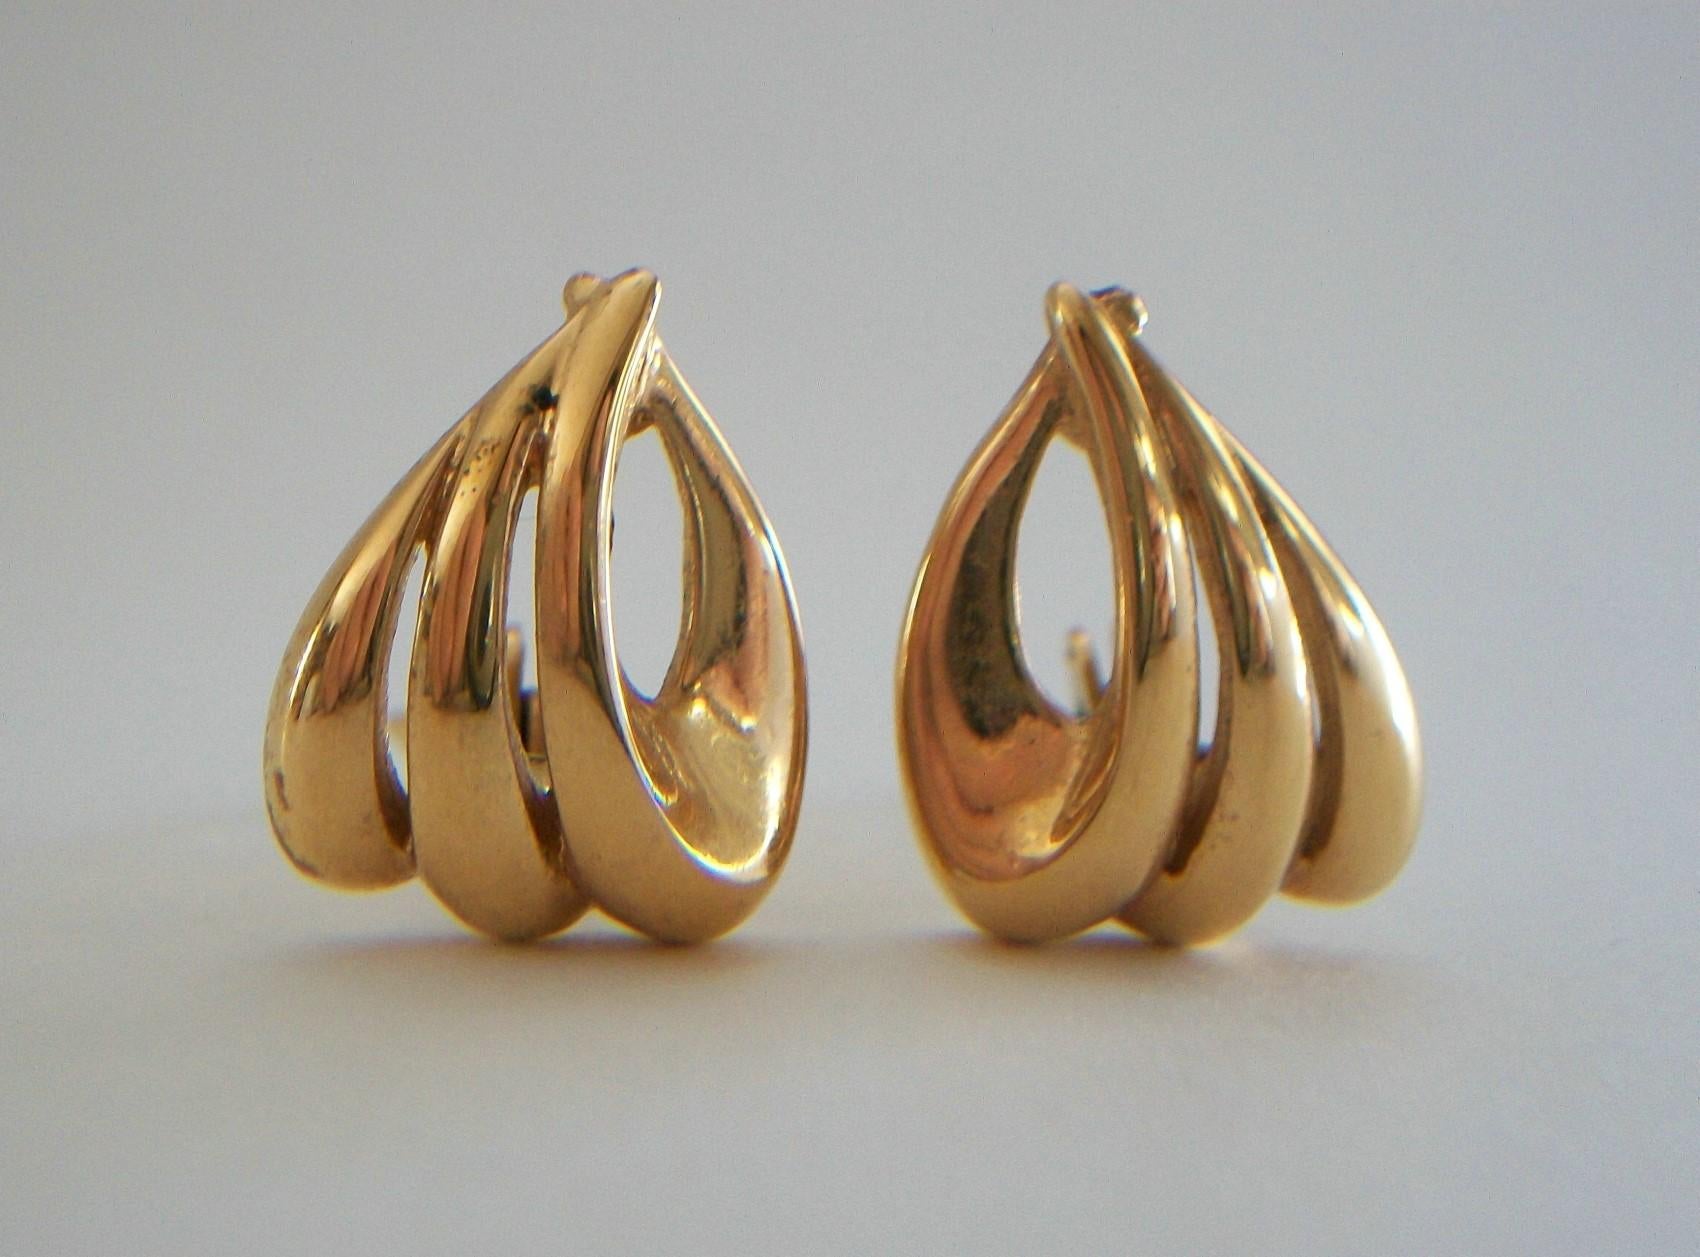 MONET - Vintage pair of gold tone ear clips - finest quality workmanship and details - signed on the side of each ear clip (see photos) - United States - late 20th century.

Excellent / near mint vintage condition - minor scuffs, scratches and